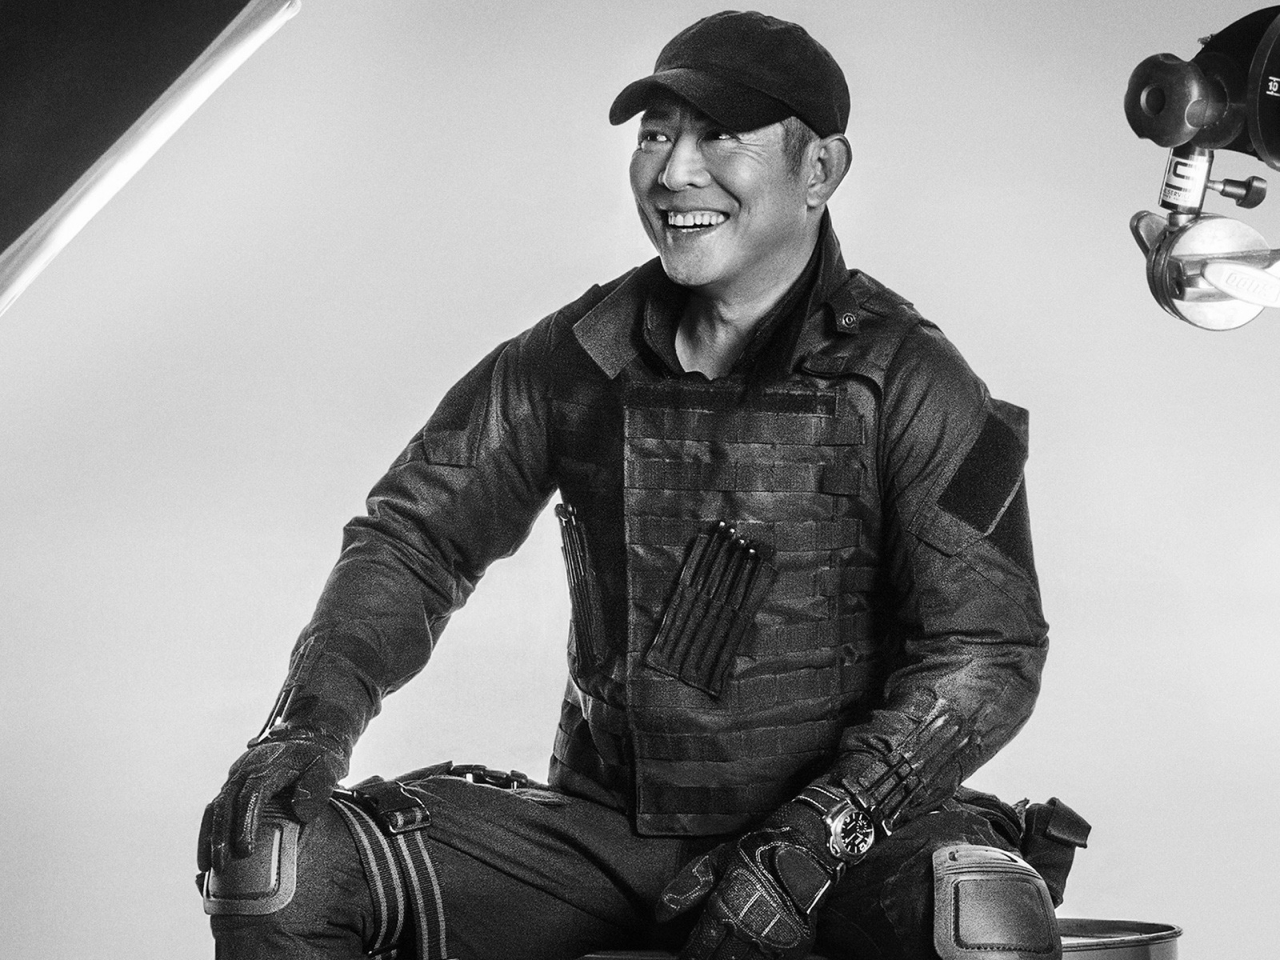 Jet Li The Expendables 3 for 1280 x 960 resolution